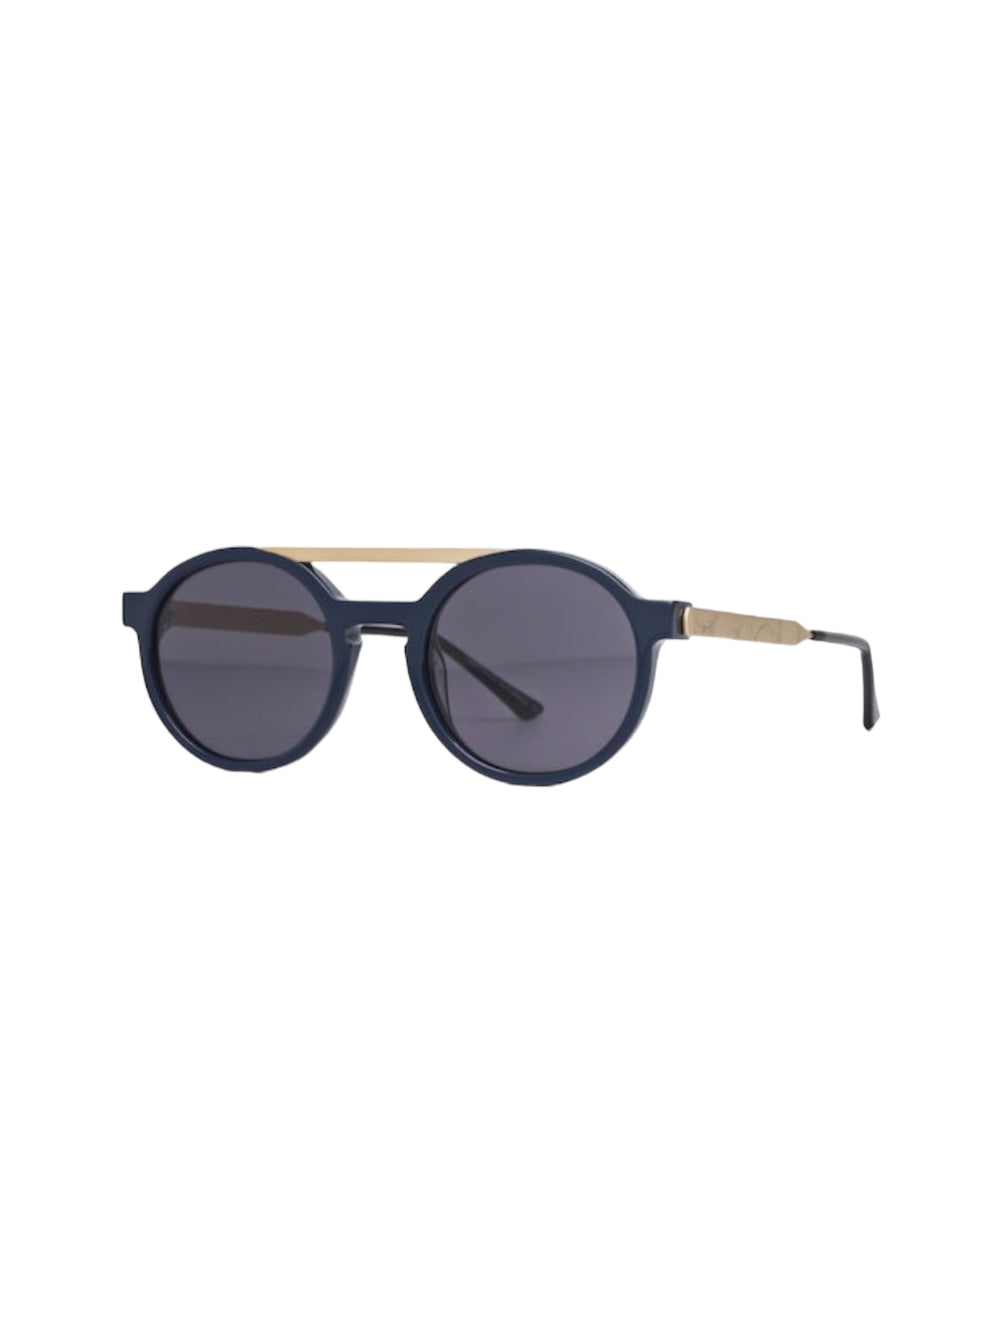 THIERRY LASRY X DR. WOO 575 - BLUE